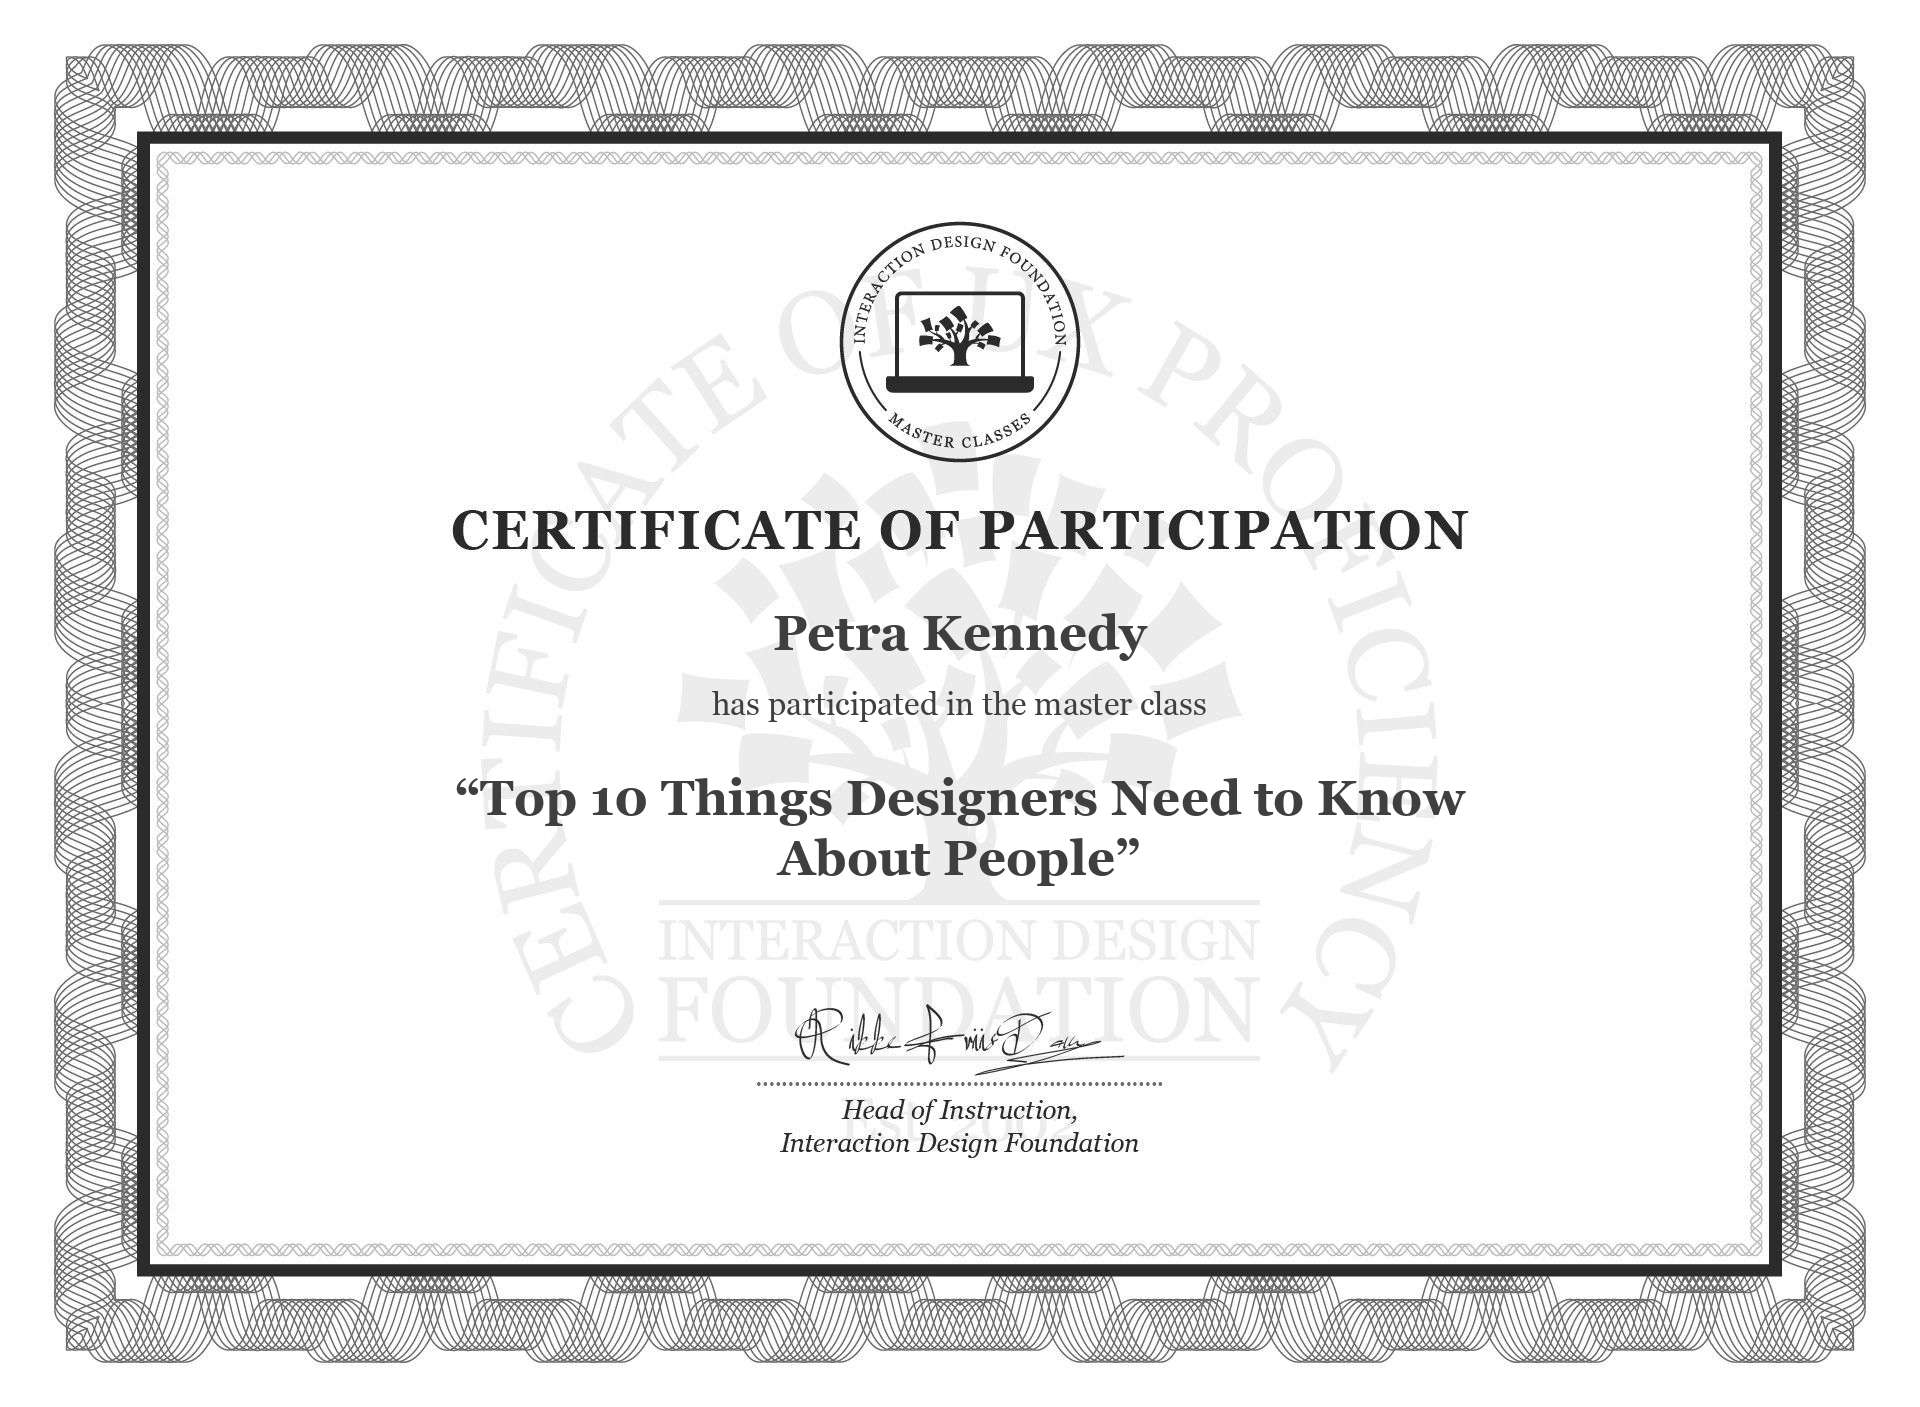 Masterclass Certificate Top 10 Things Designers Need to Know About People